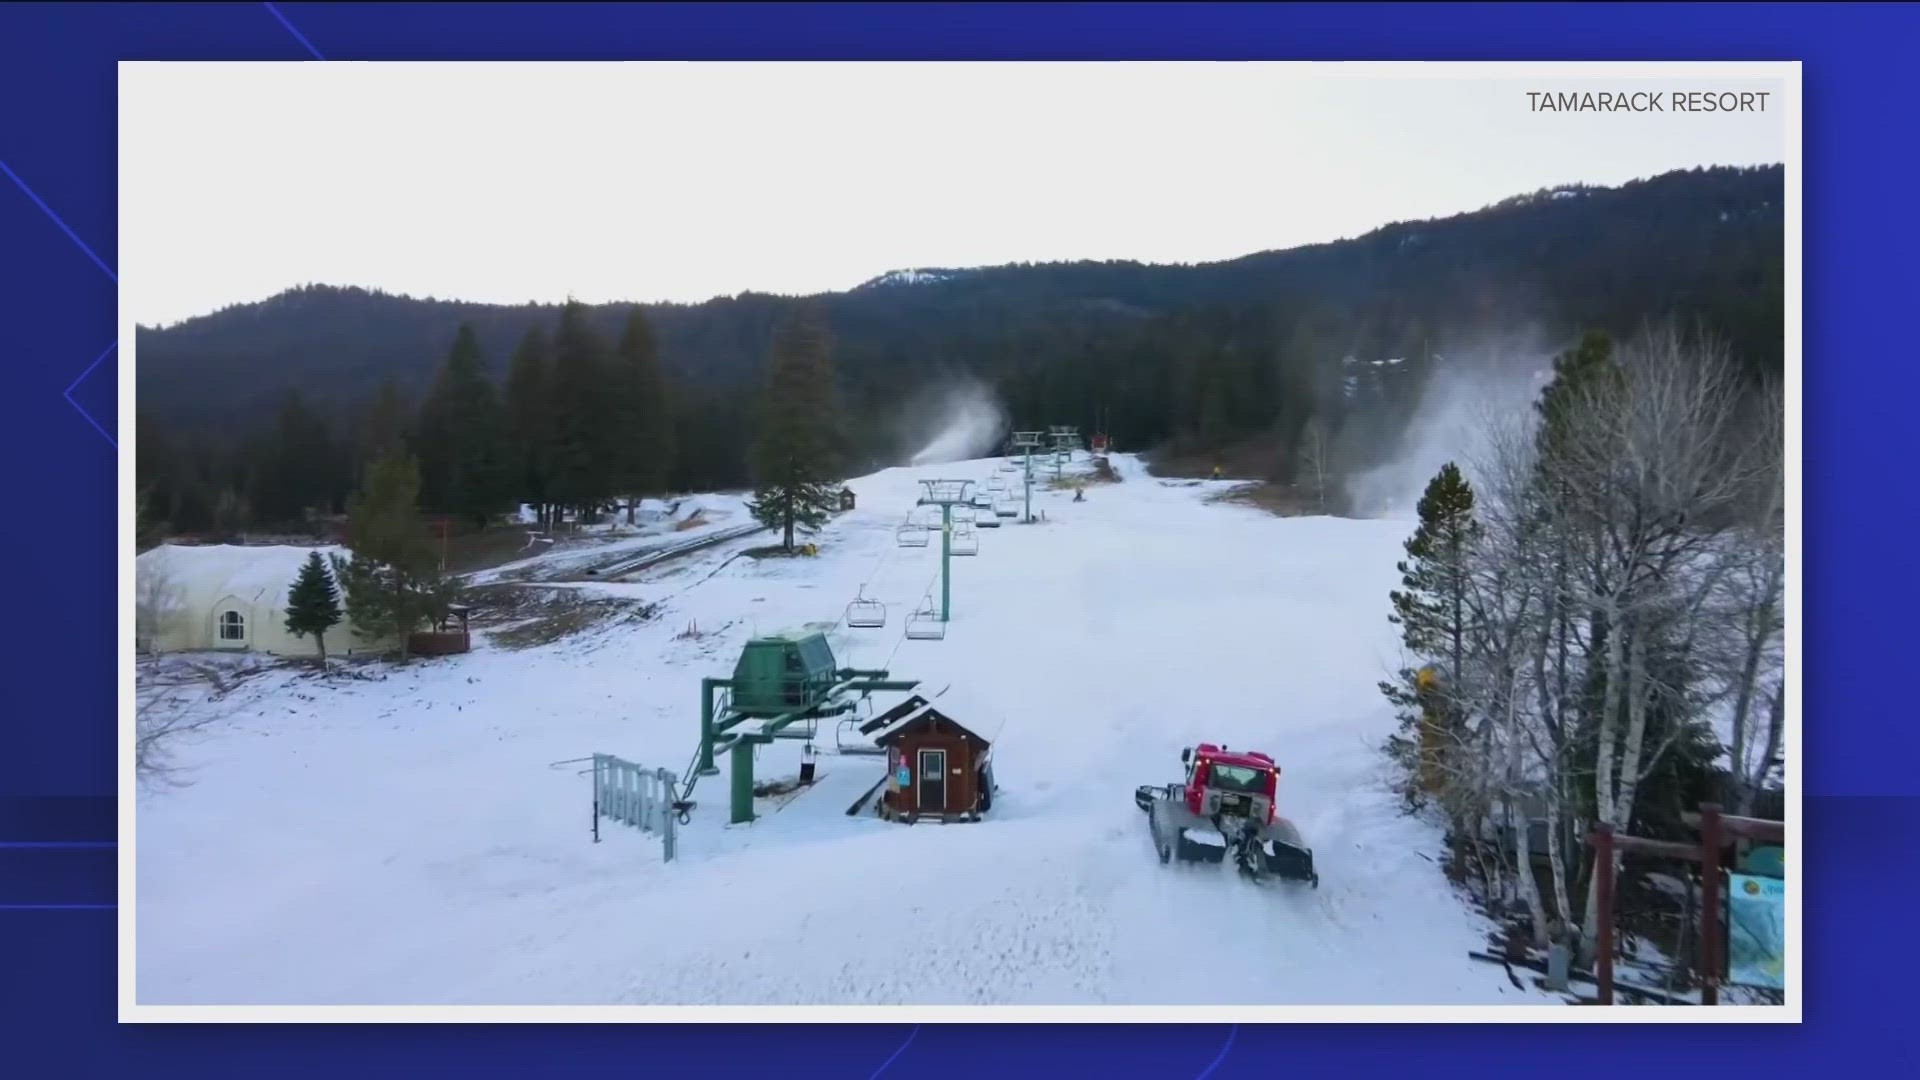 The Discovery Chairlift will be open and tickets are $15 without a season pass.